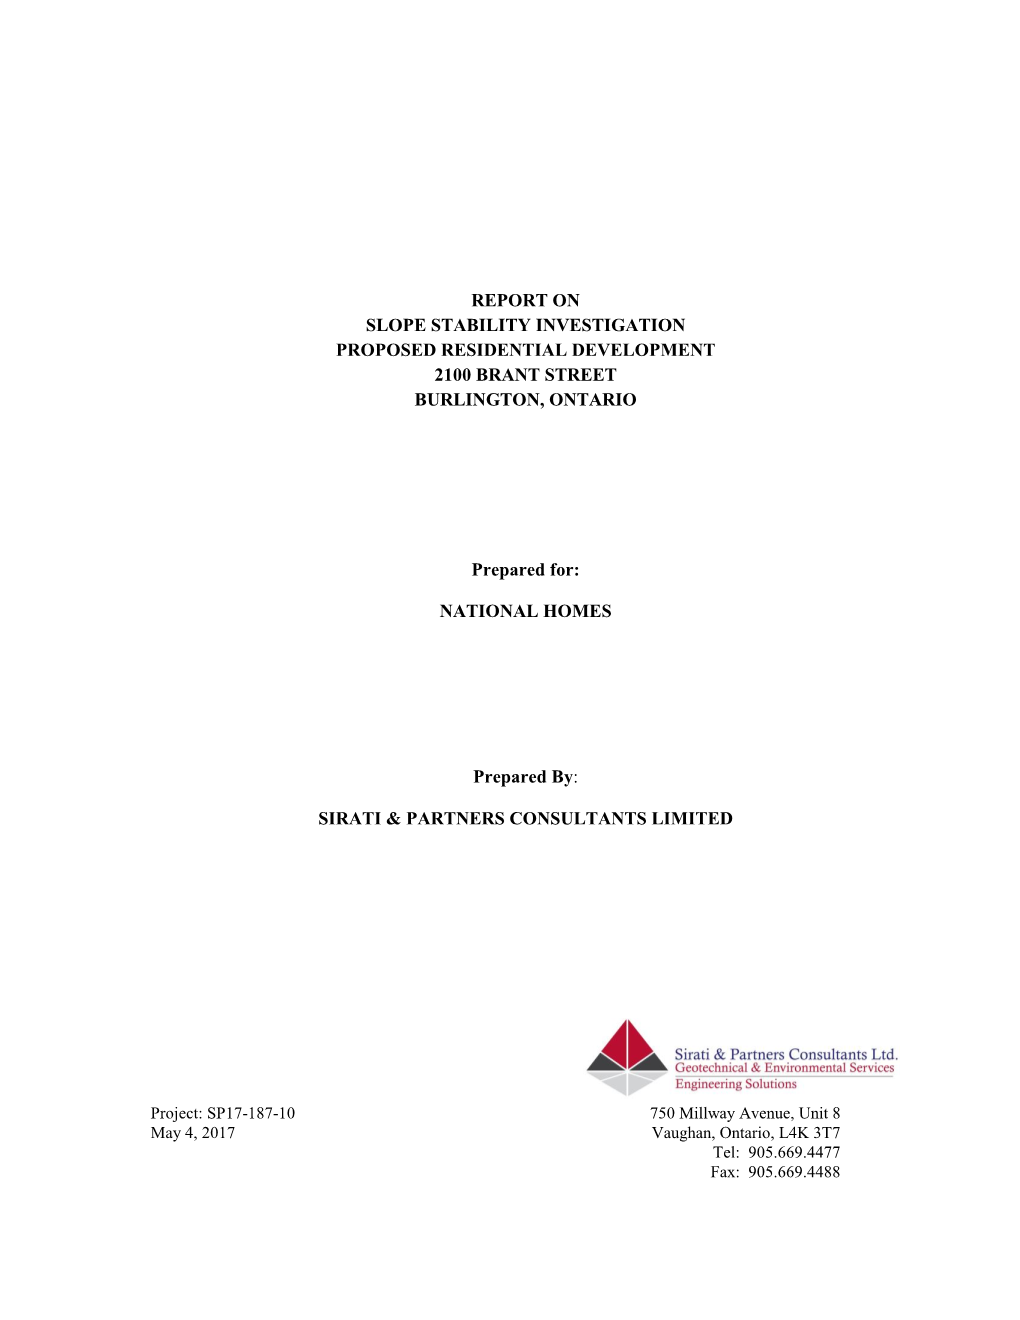 Geotechnical Report for the Proposed Development and Environmental Studies at the Subject Site Are Reported Under Separate Covers